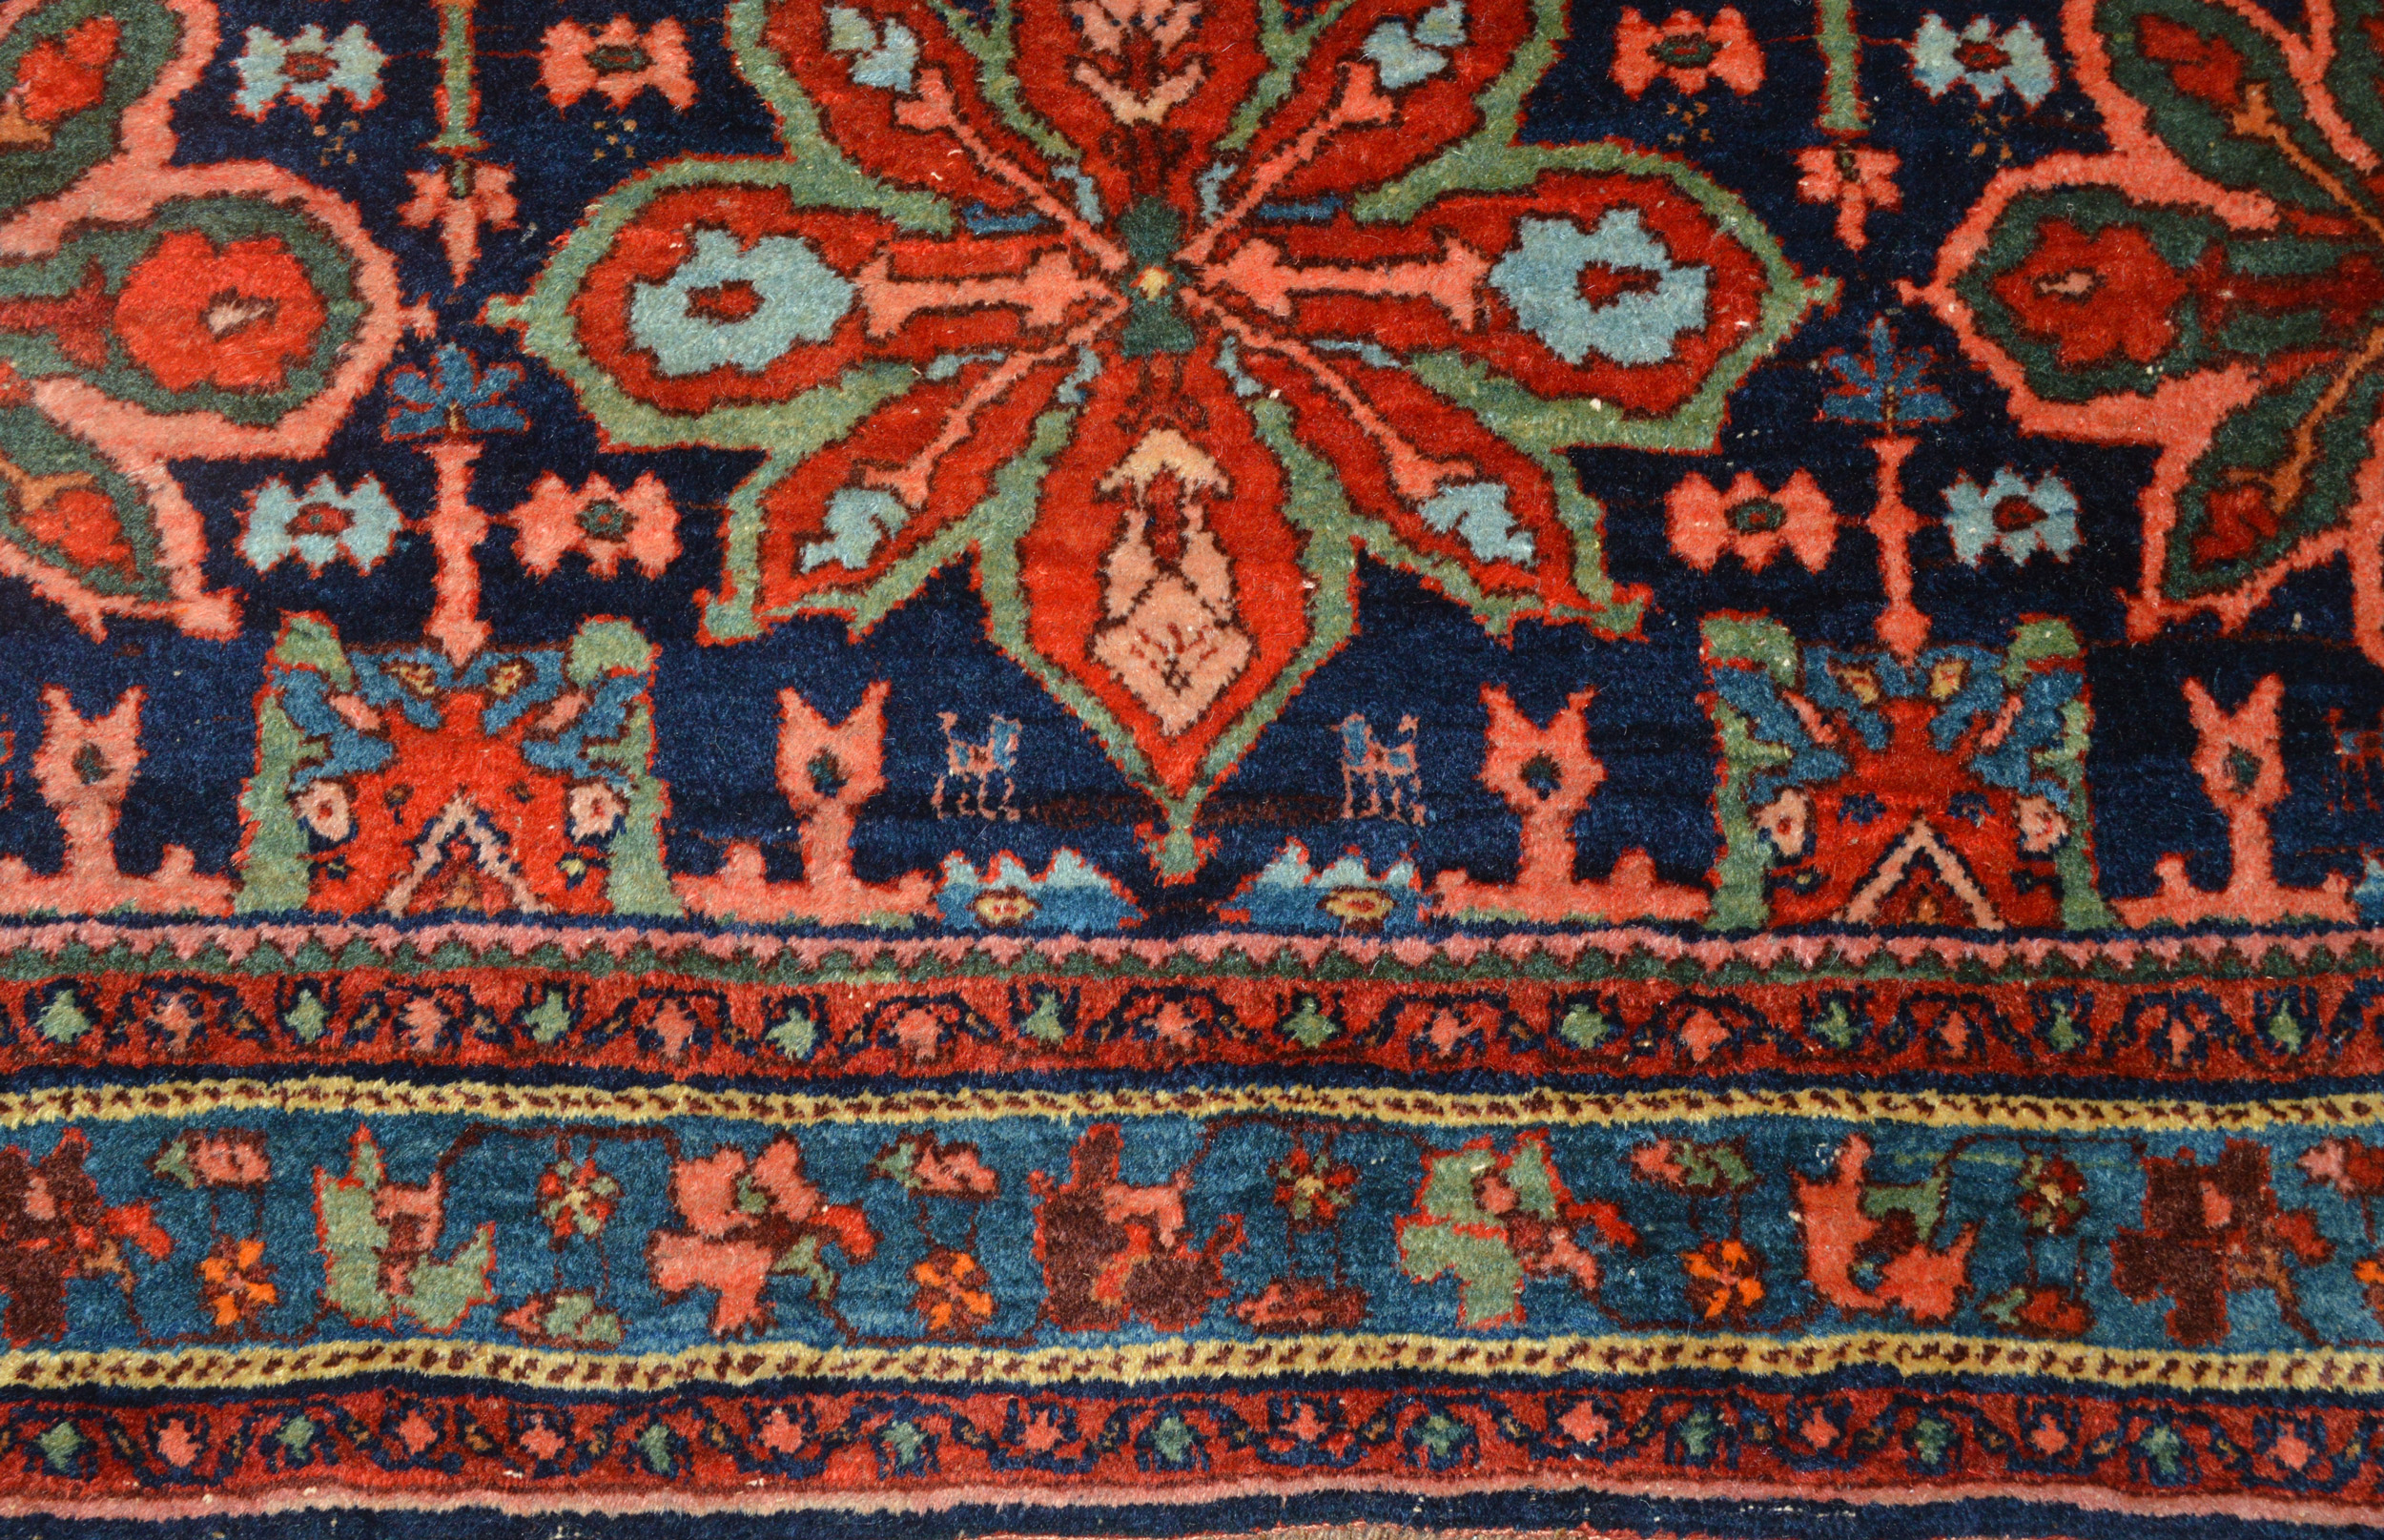 Field and border detail from an antique Persian Bidjar with stylized flowers and animals on a navy blue field, circa 1915 - Douglas Stock Gallery